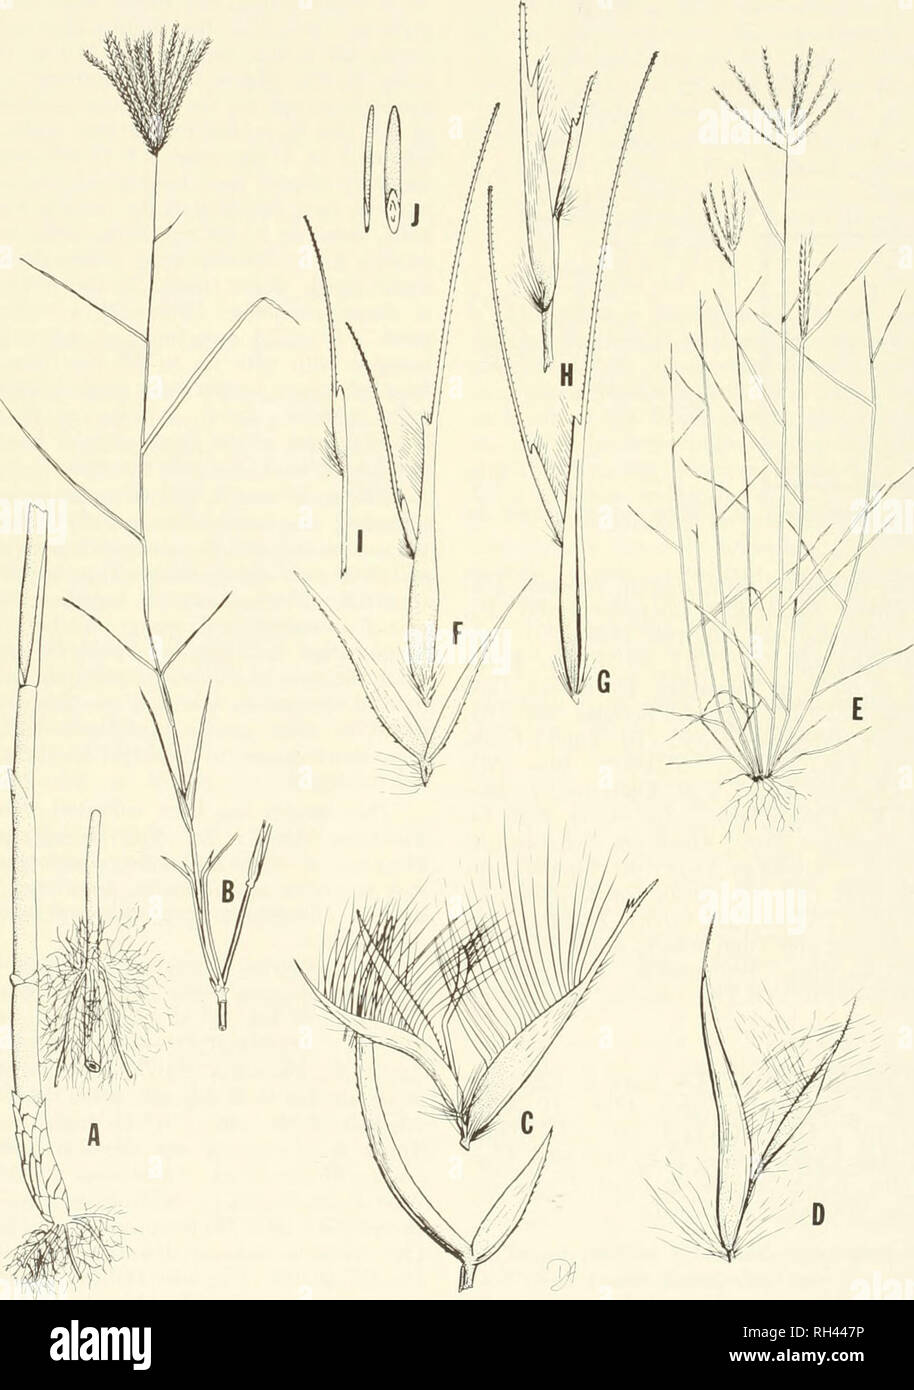 . Brigham Young University science bulletin. Biology -- Periodicals. 44 Brigham Young University Science Bulletin. Fig. 22. Chloris robusta and C. Mollis. (A-D) C. rohmta. (A) lower and middle portions of stem,  1/3; (B) upper stem and inflorescence, x 1/4; (C) spikelet, partly dissected, x 10; (D) sterile florets, x 15. (E-J) C. mollis. (E) habit, x 1/4; (F) spikelet from type of C. mollis, partly dissected, x 10; (G) floret from type of C. anlsopoda, x 10; (H) sterile florets from spikelet with two sterile florets, x 20; (I) sterile floret from spikelet with single sterile floret, x 15; (J) Stock Photo